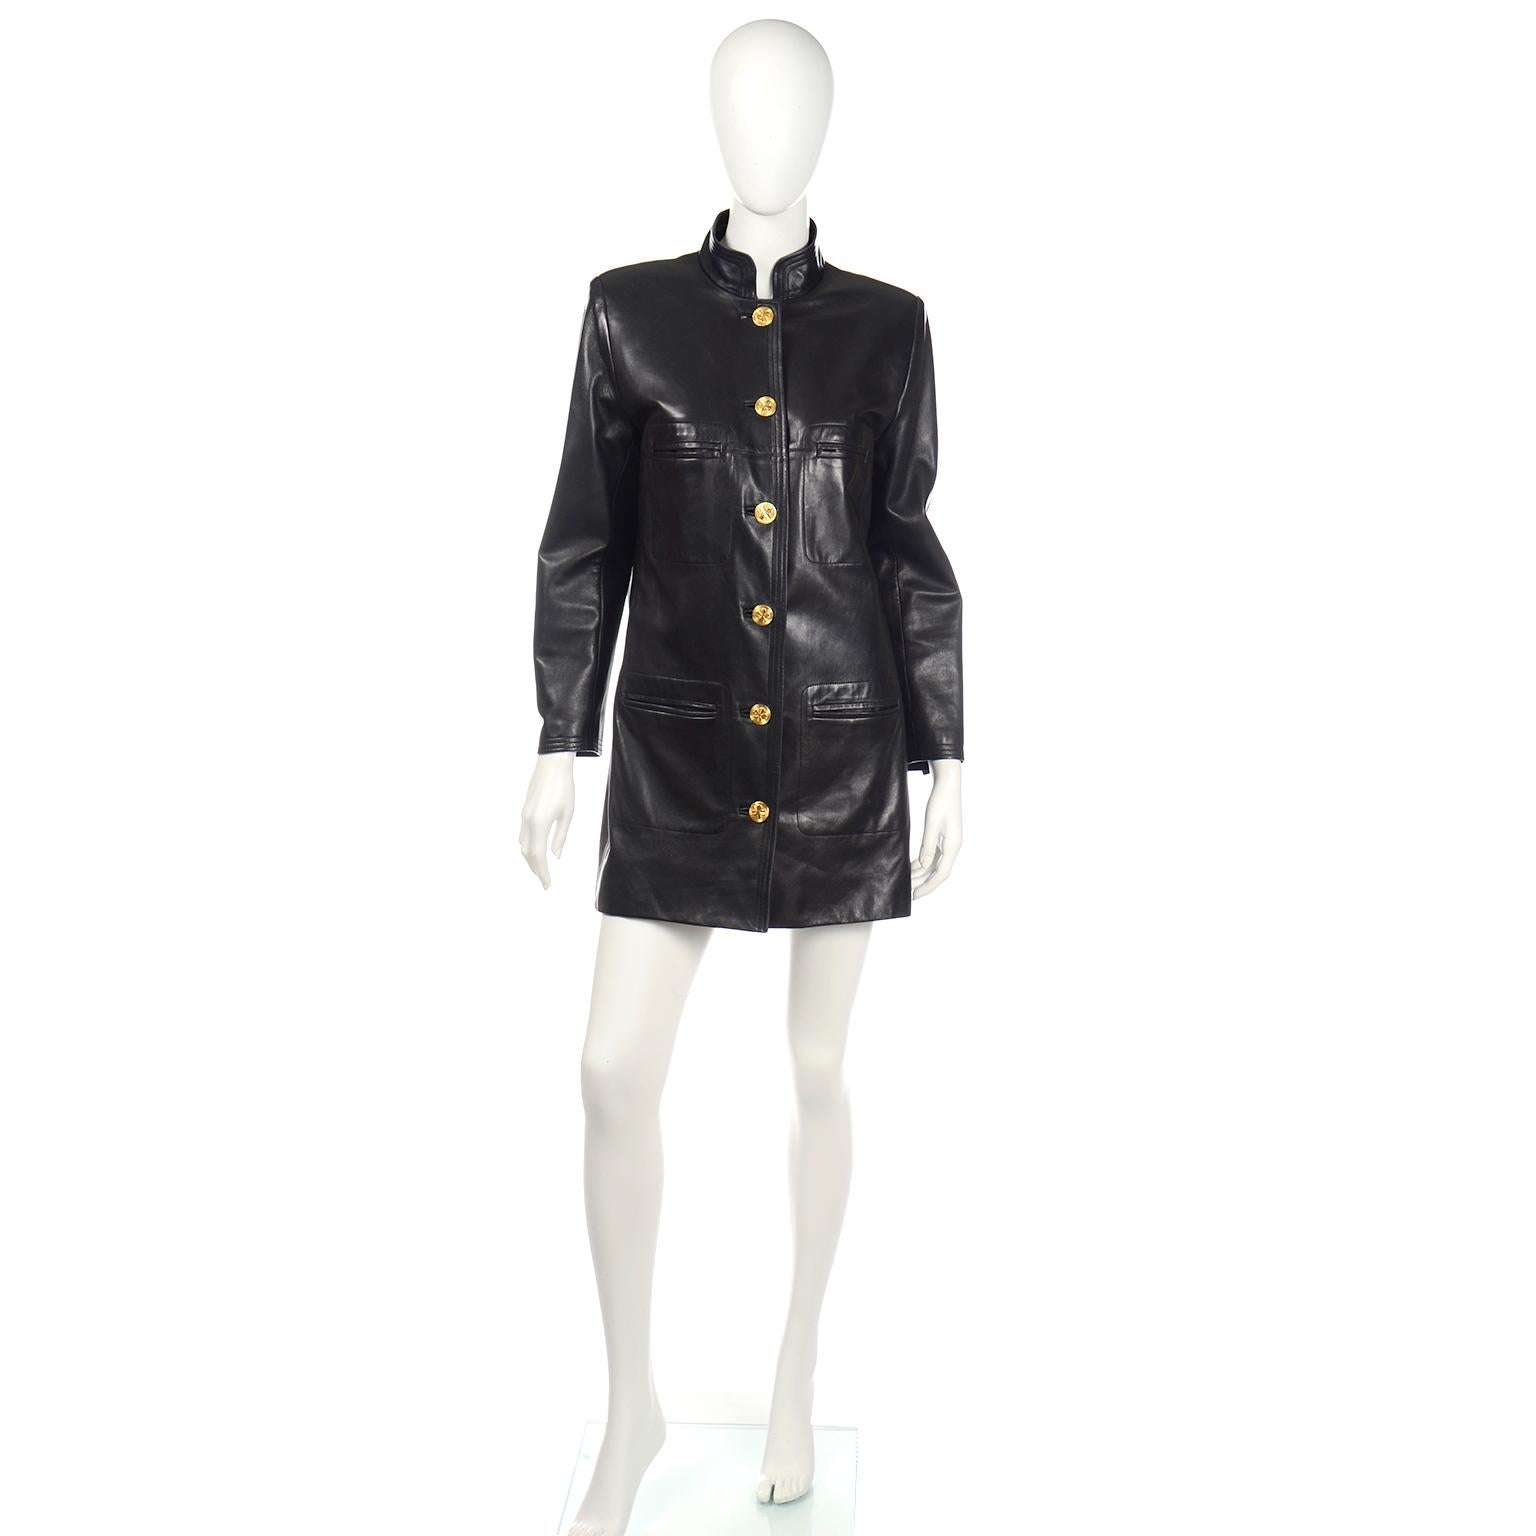 This sensational vintage Chanel leather jacket is one of our favorite pieces this year! This fabulous coat is in a supple soft black leather and buttons up the front with Chanel's iconic 4 leaf clover gold metal buttons. The jacket has a mandarin